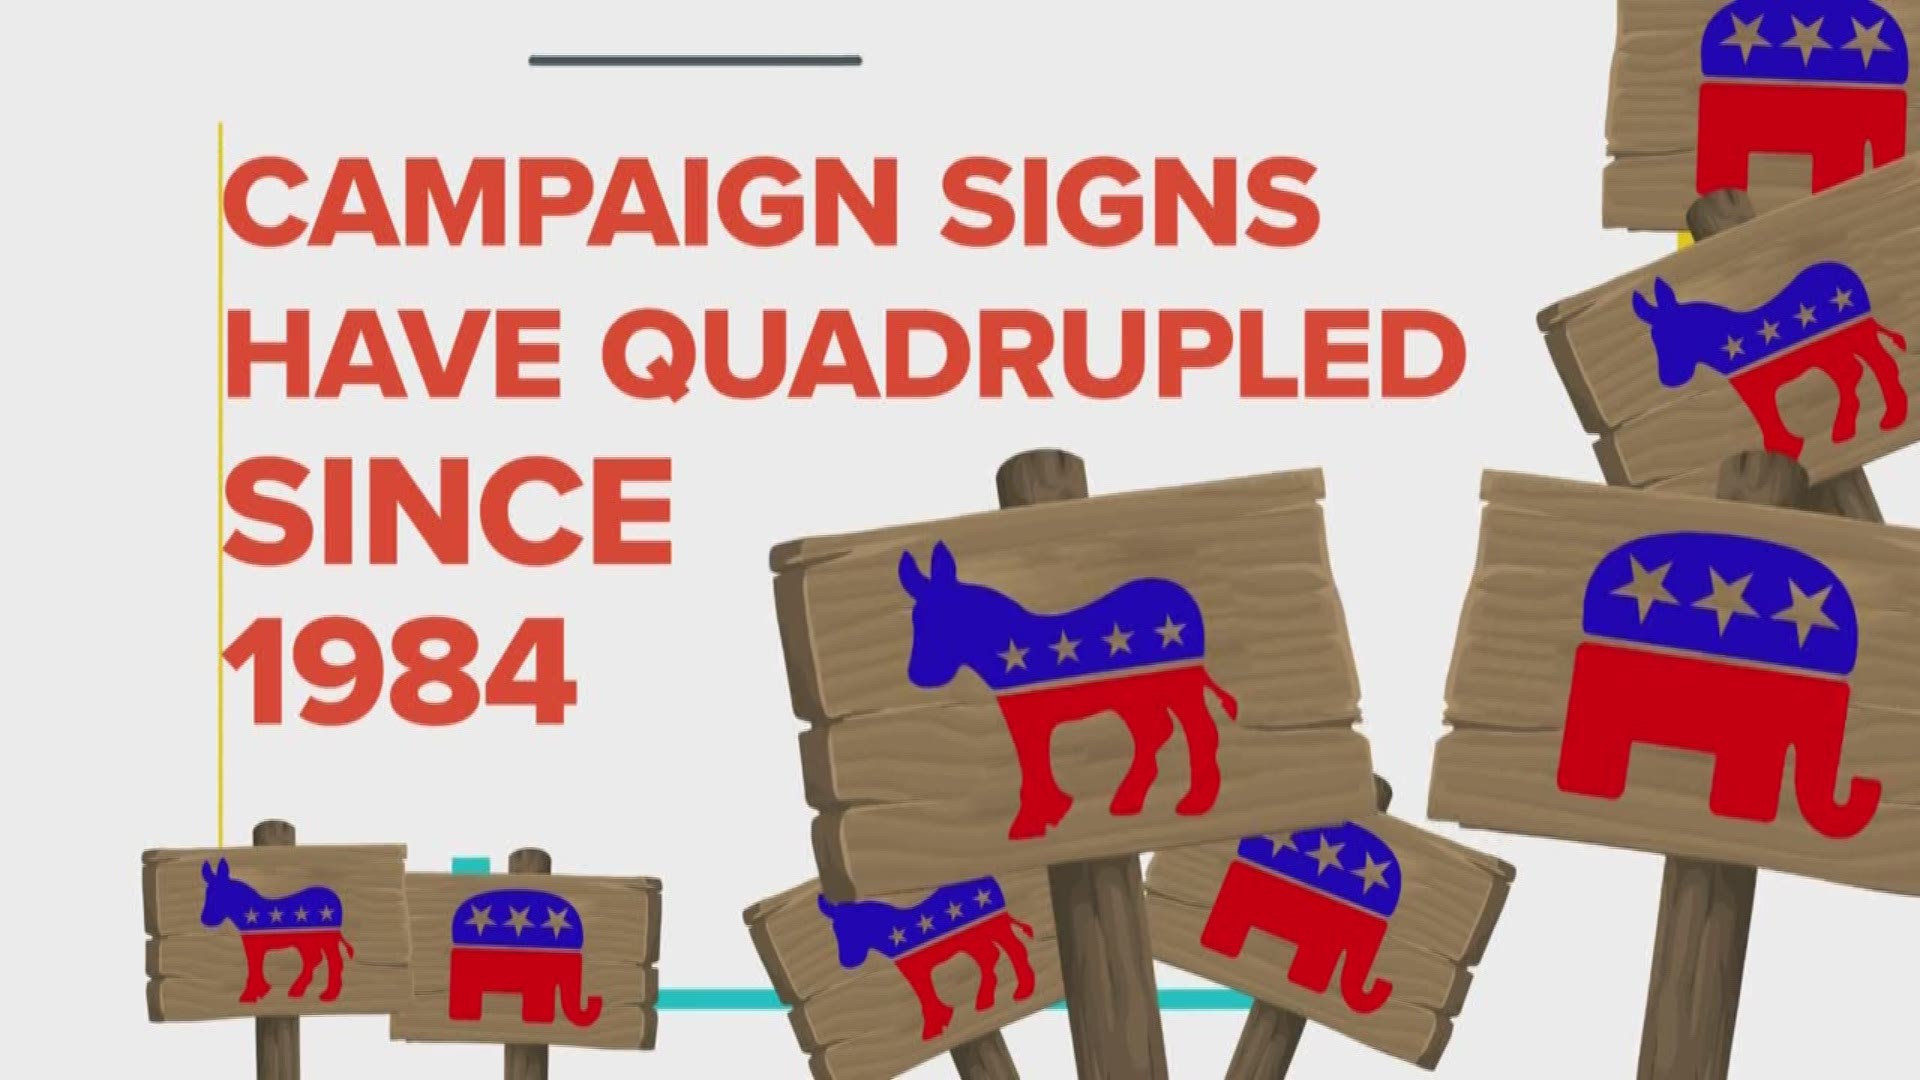 They clutter street corners during every election season, so that must mean that campaign signs influence voters, right? The answer may surprise you.